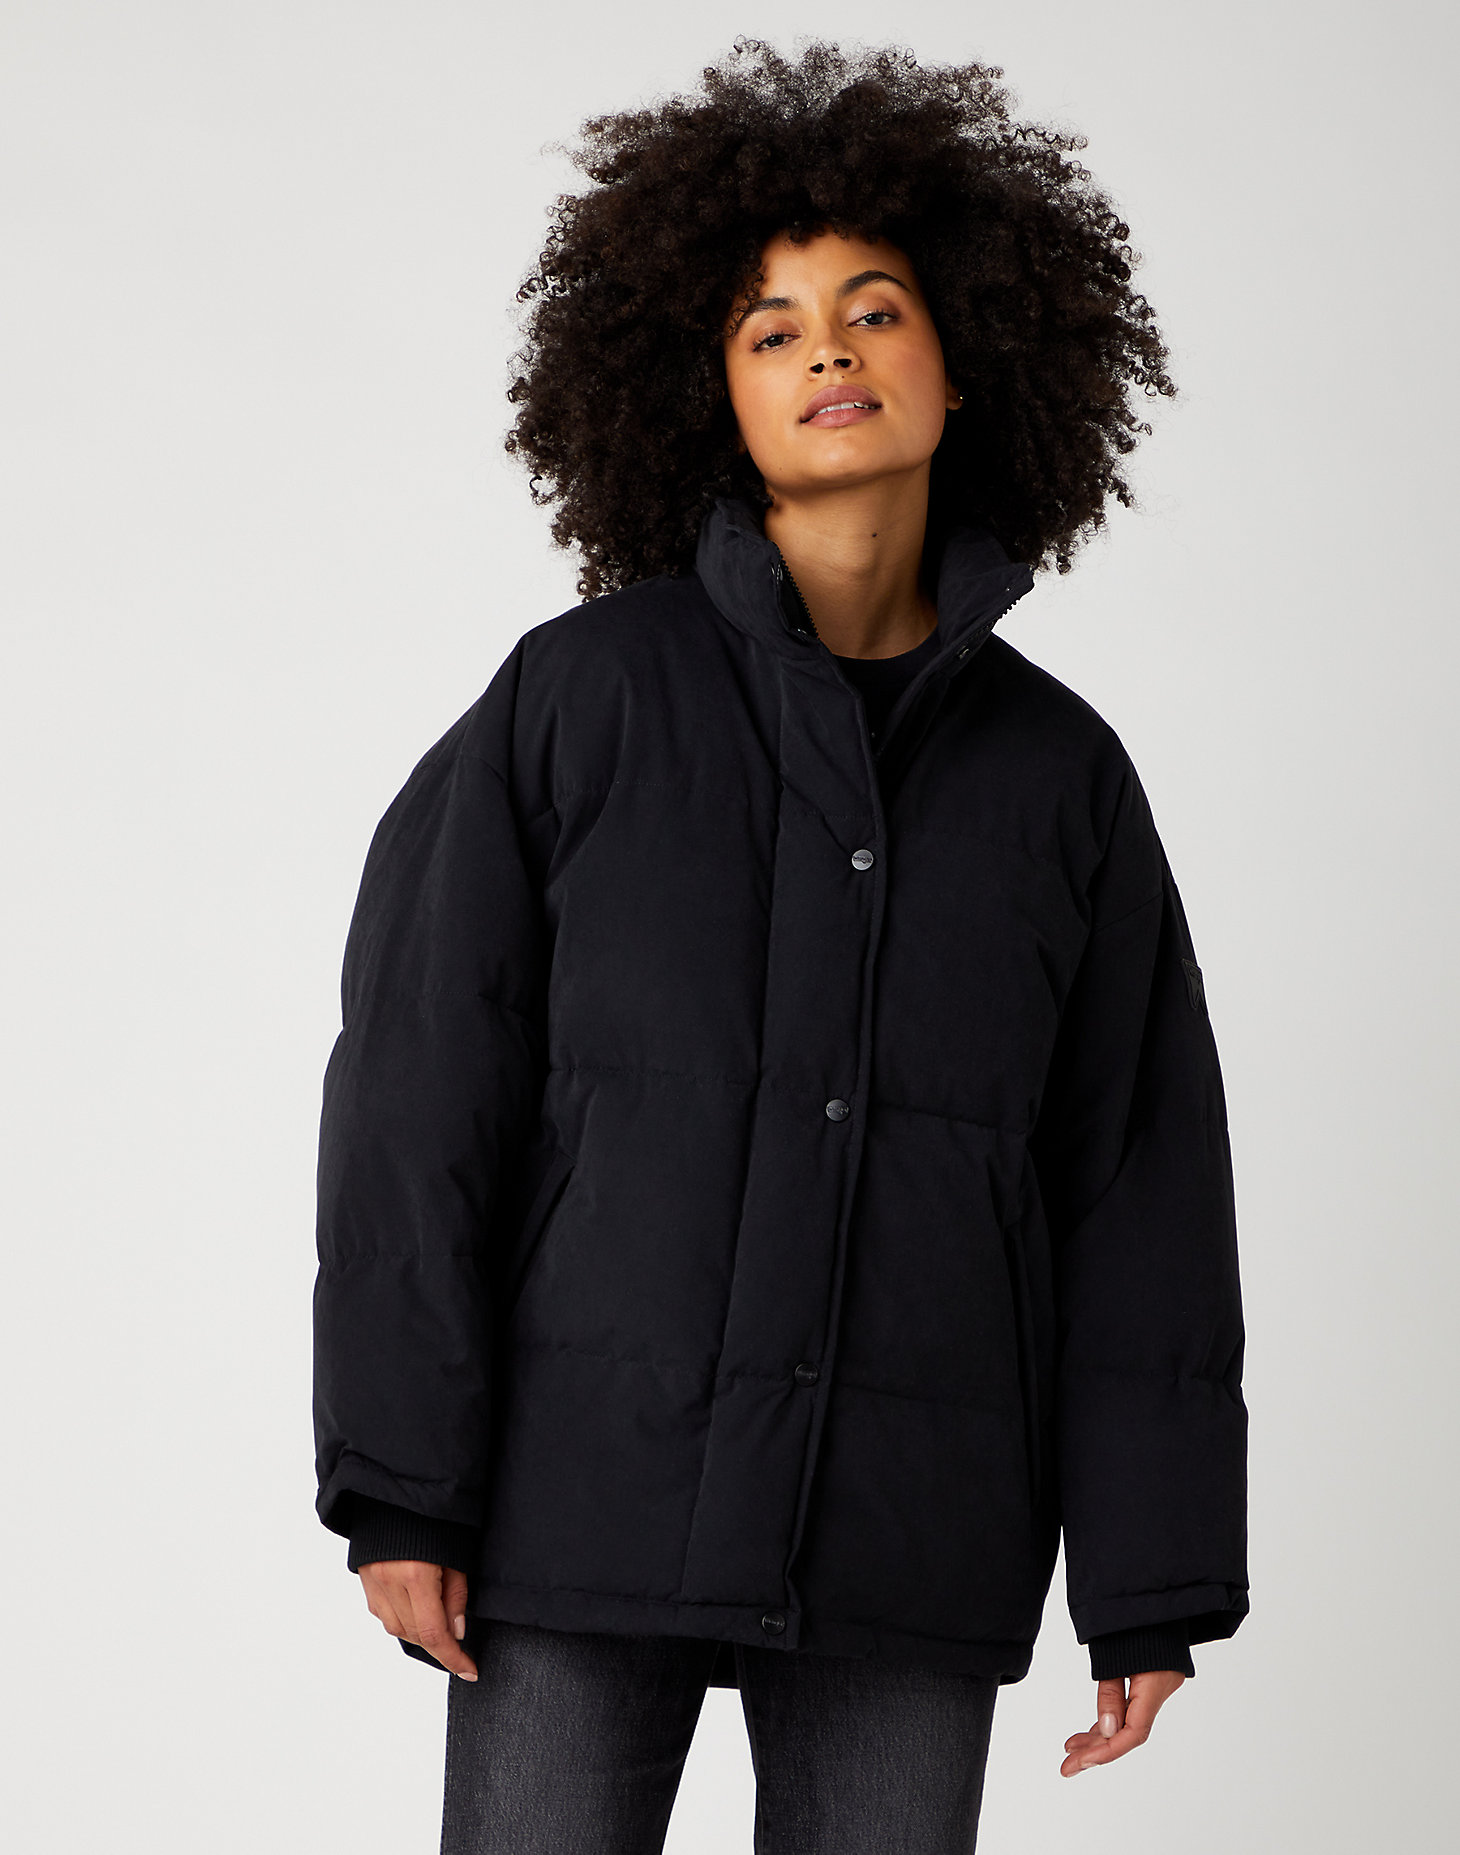 Relaxed Puffer in Black alternative view 1